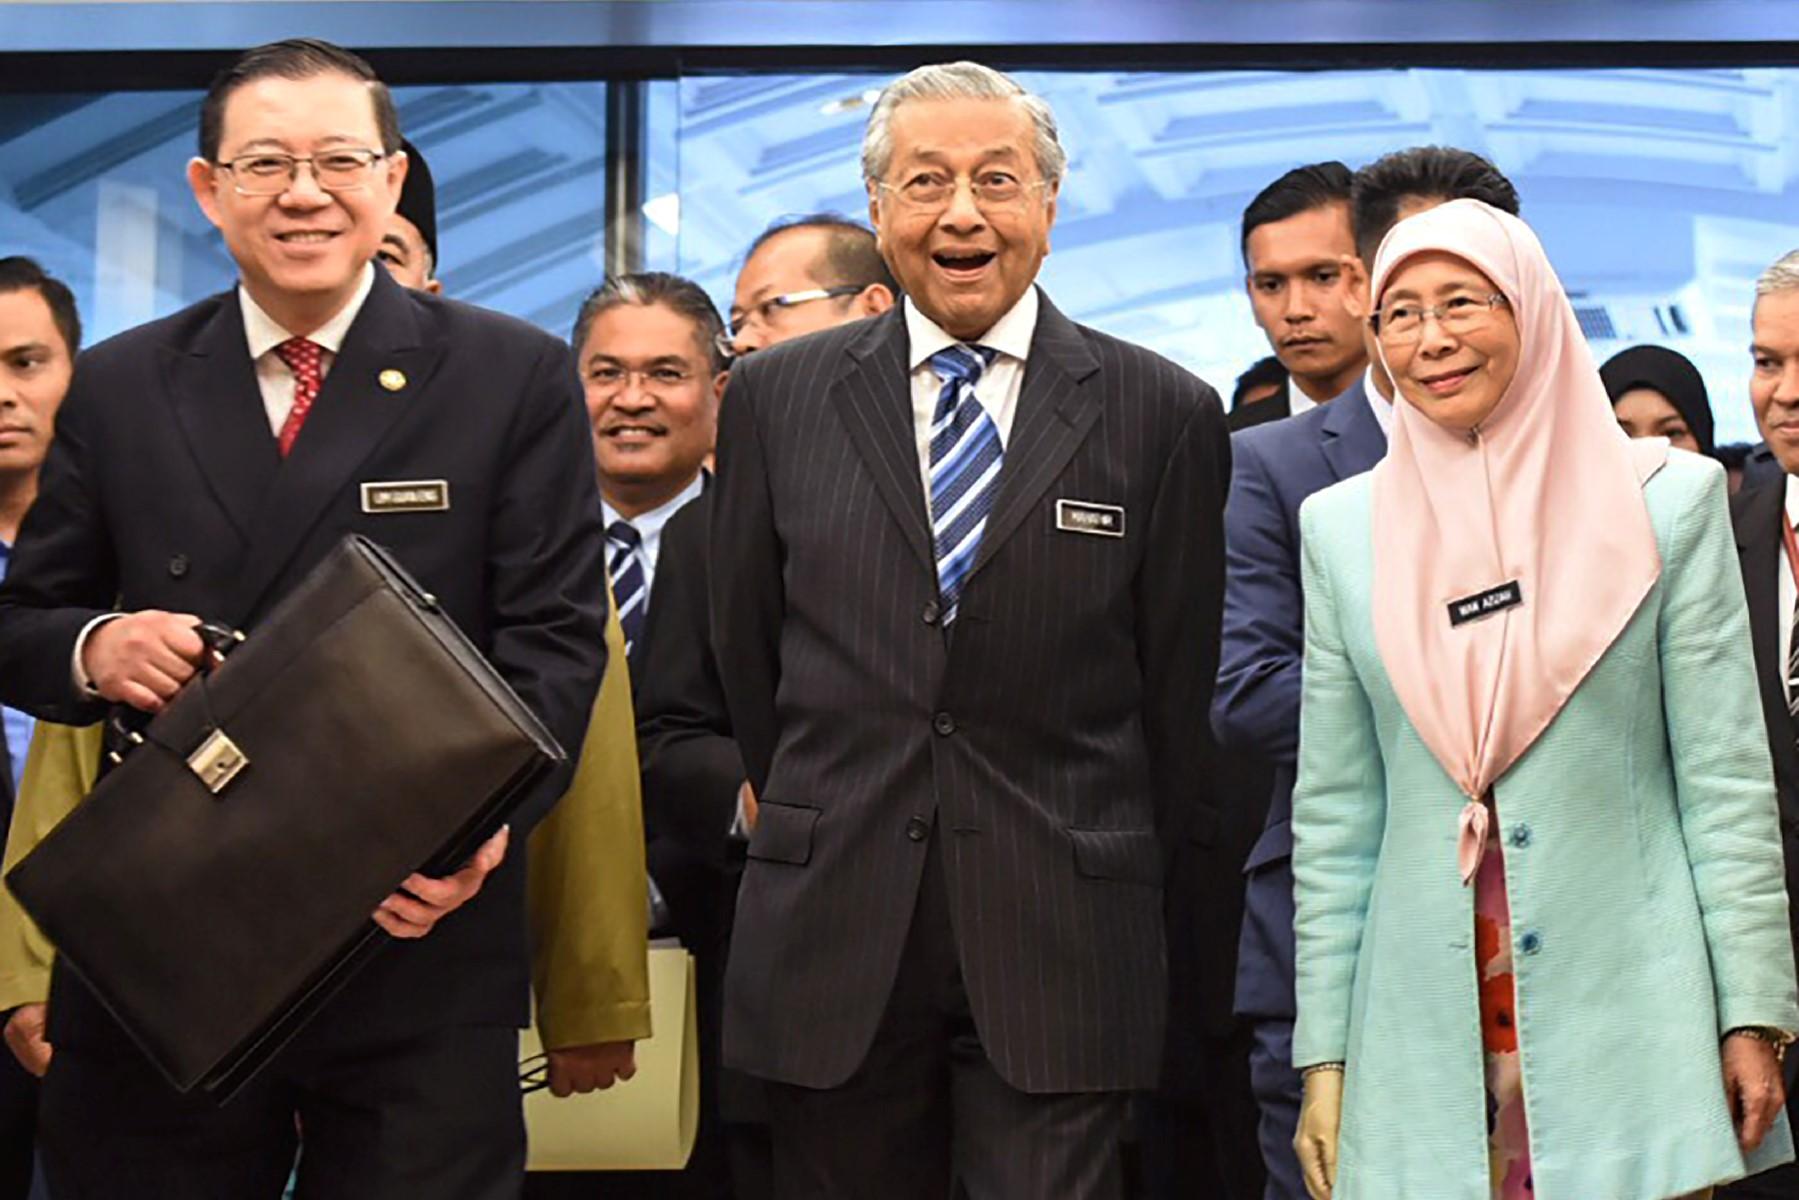 Former prime minister Dr Mahathir Mohamad (centre) with then finance minister Lim Guan Eng and deputy prime minister at the time, Dr Wan Azizah Wan Ismail before the tabling of the 2019 budget in Parliament. Photo: AFP